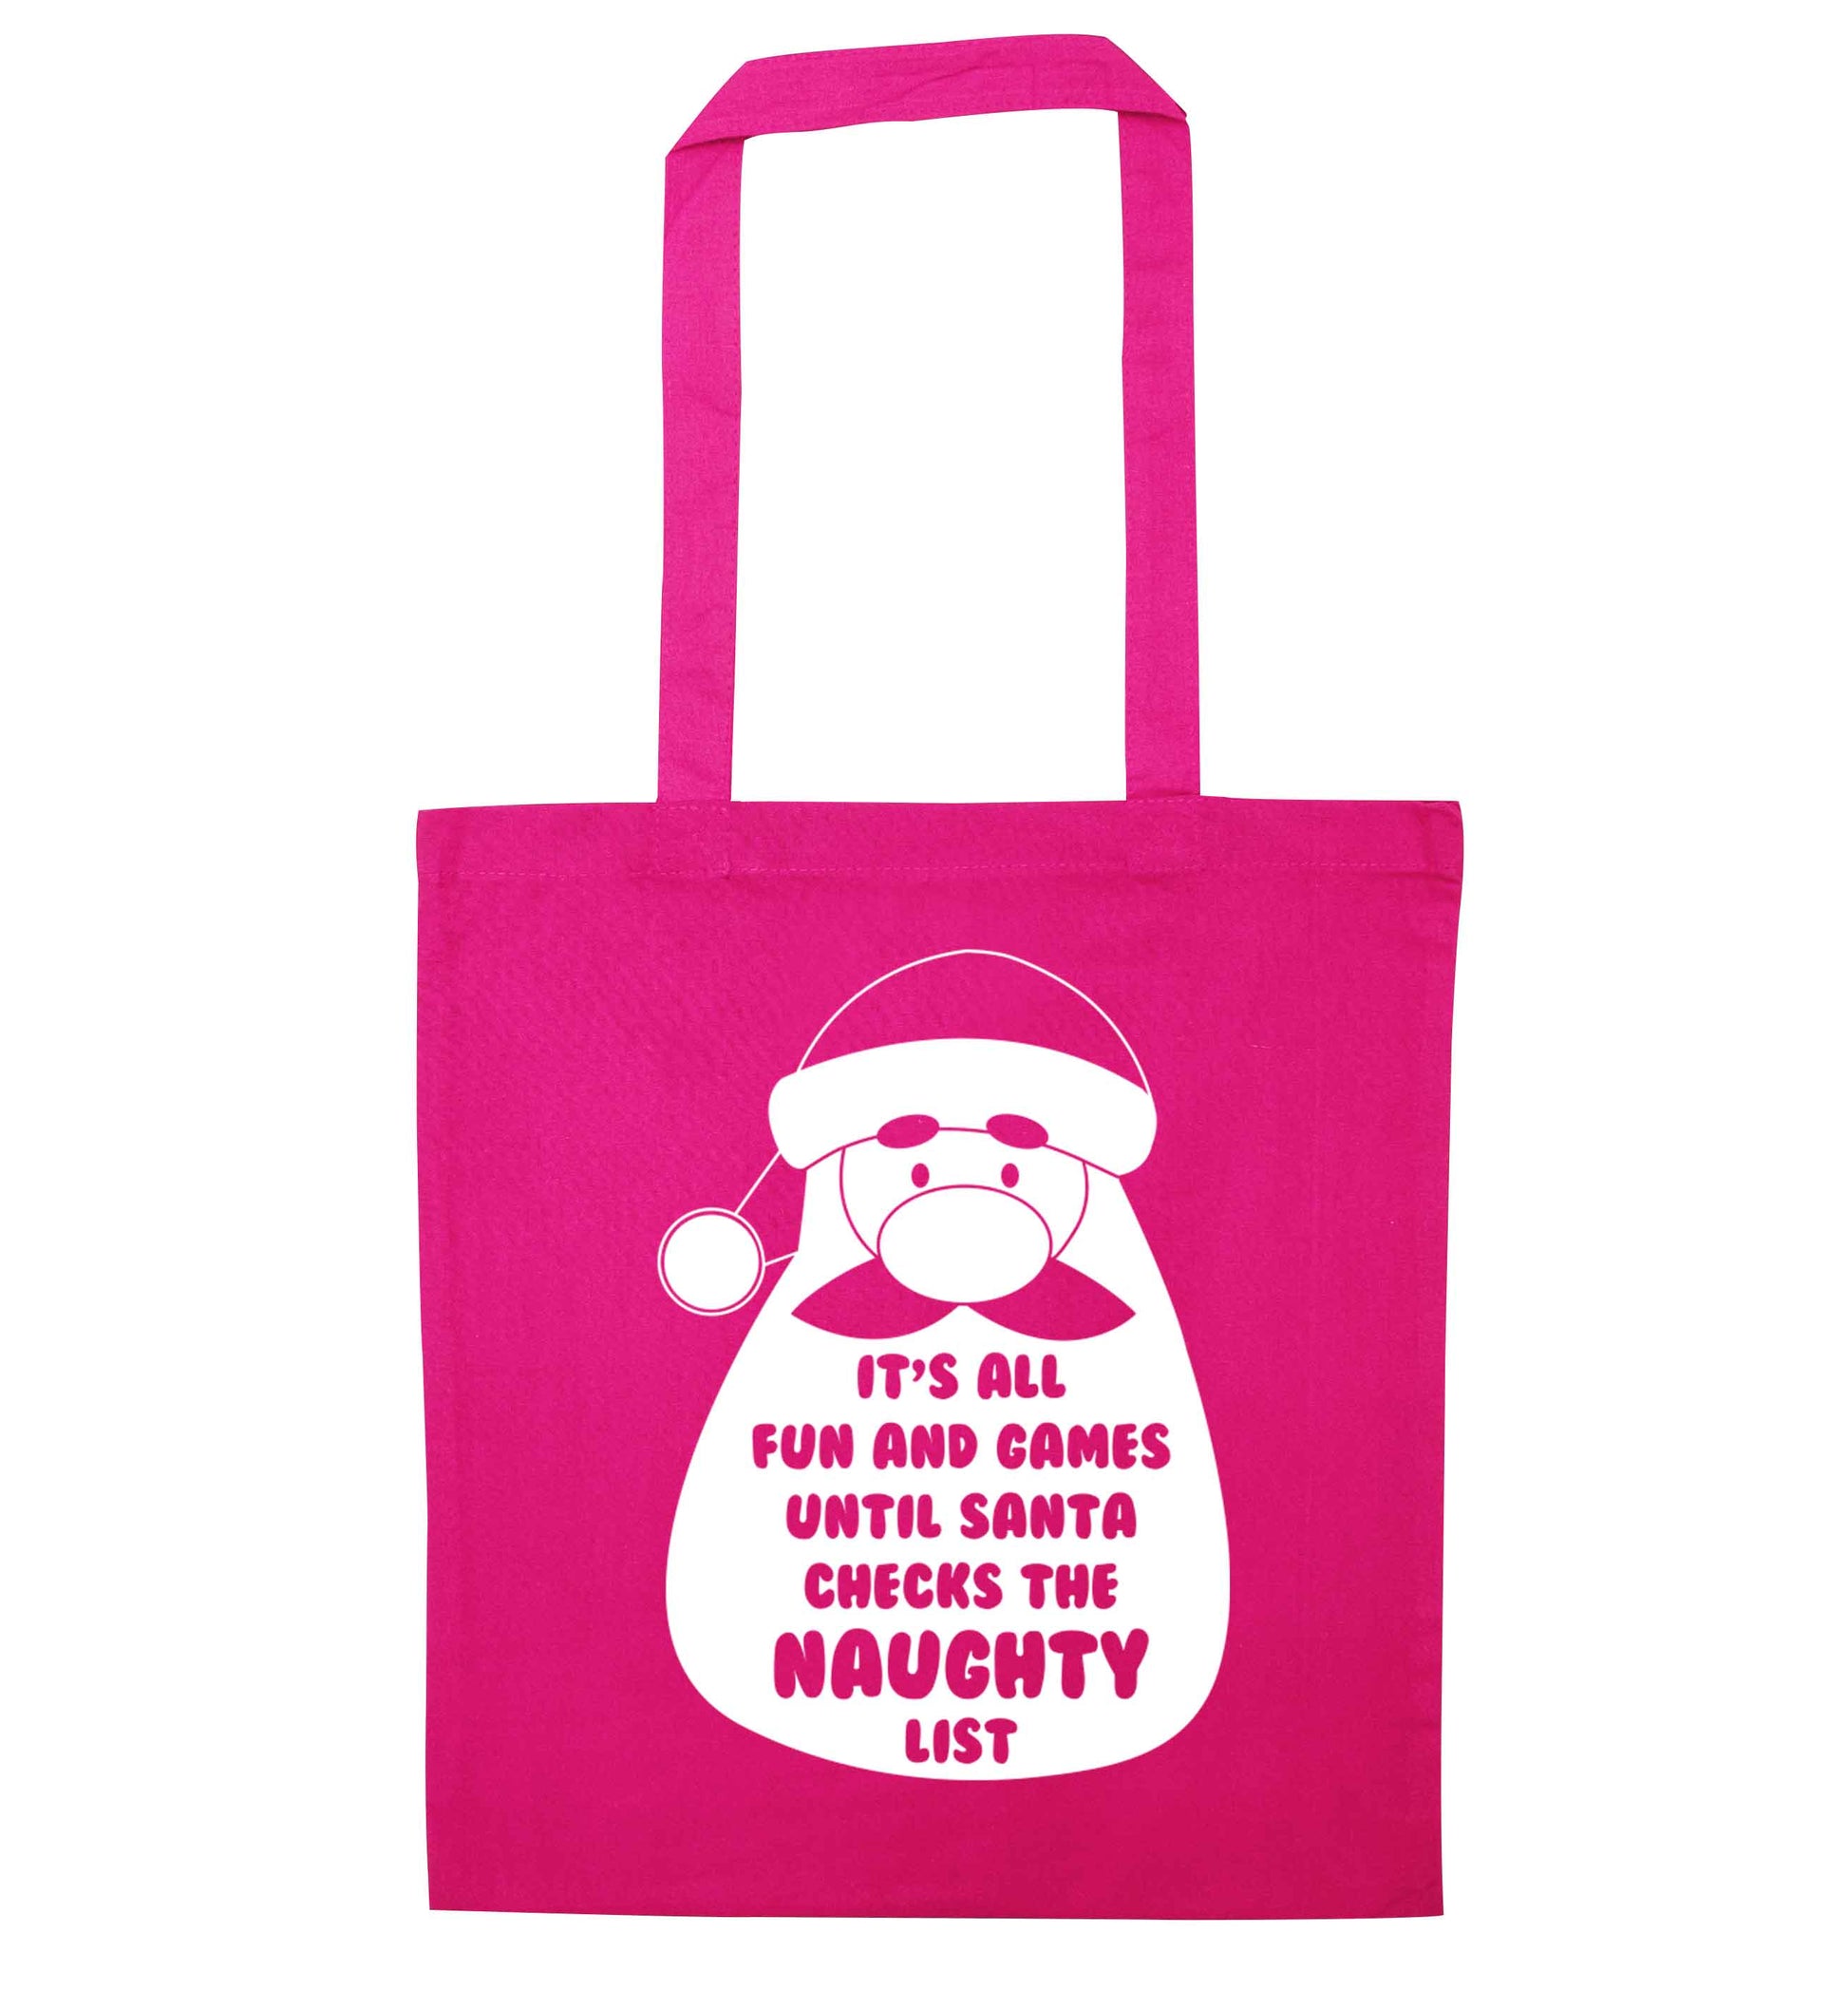 It's all fun and games until Santa checks the naughty list pink tote bag